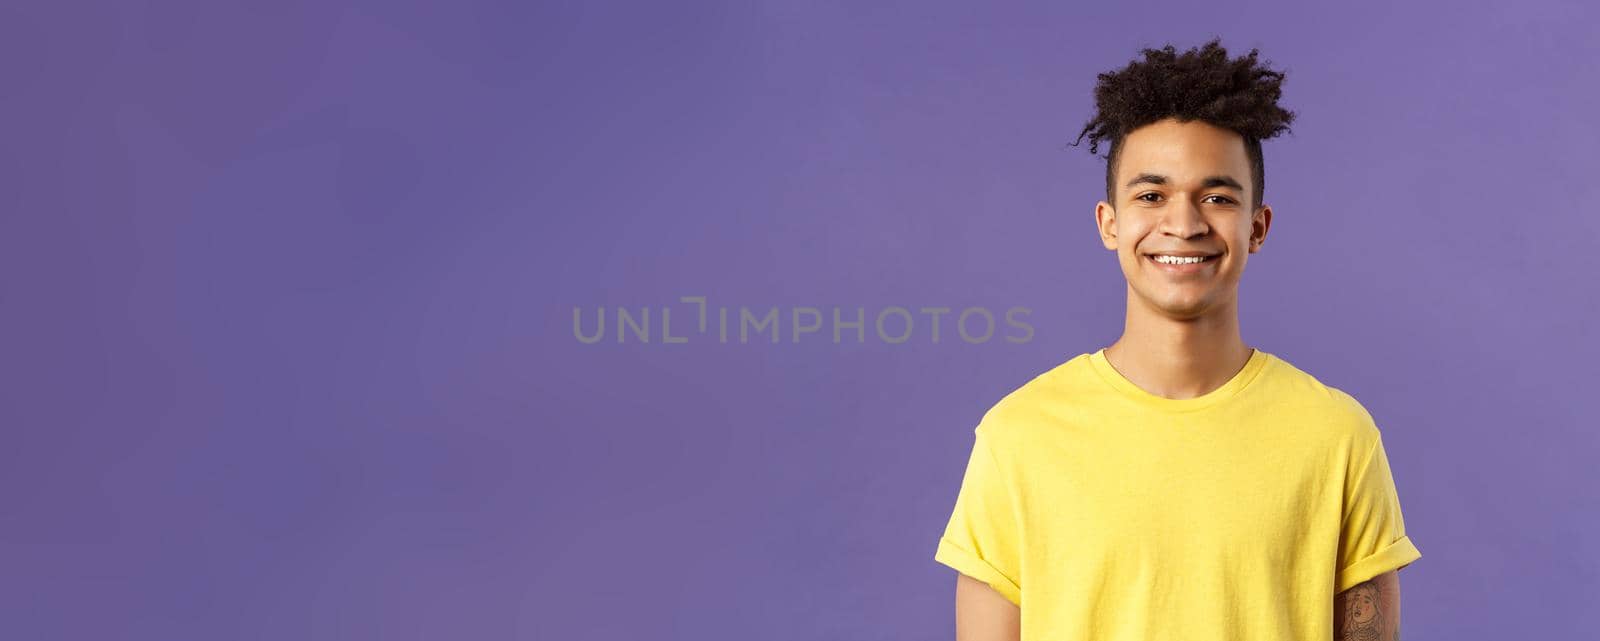 Close-up portrait of nice, friendly-looking hispanic male student in yellow t-shirt, grinning delighted, look upbeat happy and positive, standing enthusiastic with beaming smile purple background.